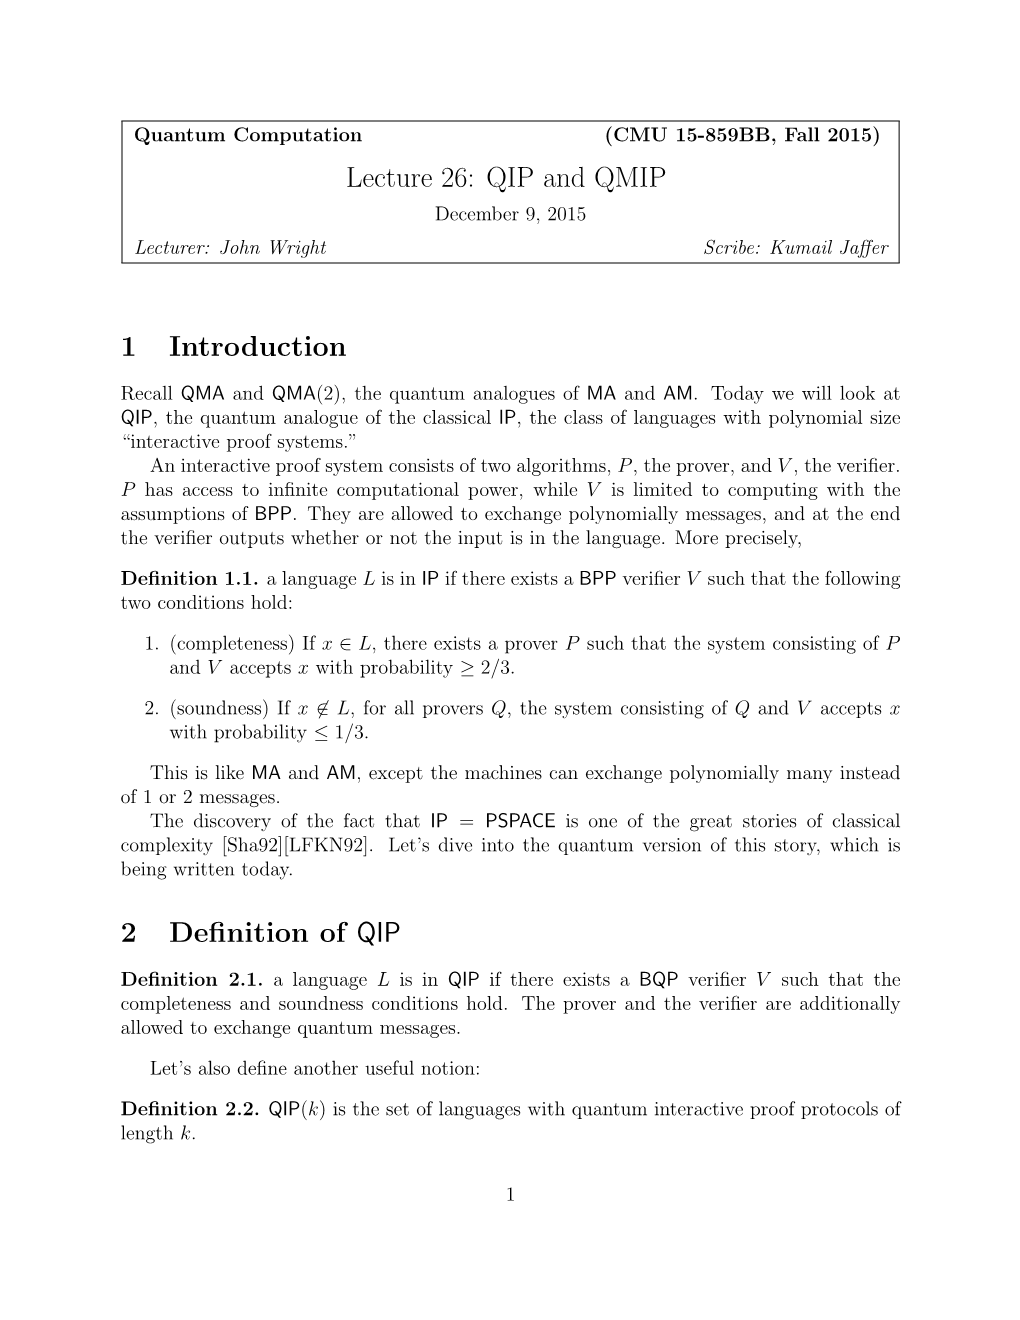 Lecture 26: QIP and QMIP 1 Introduction 2 Definition Of